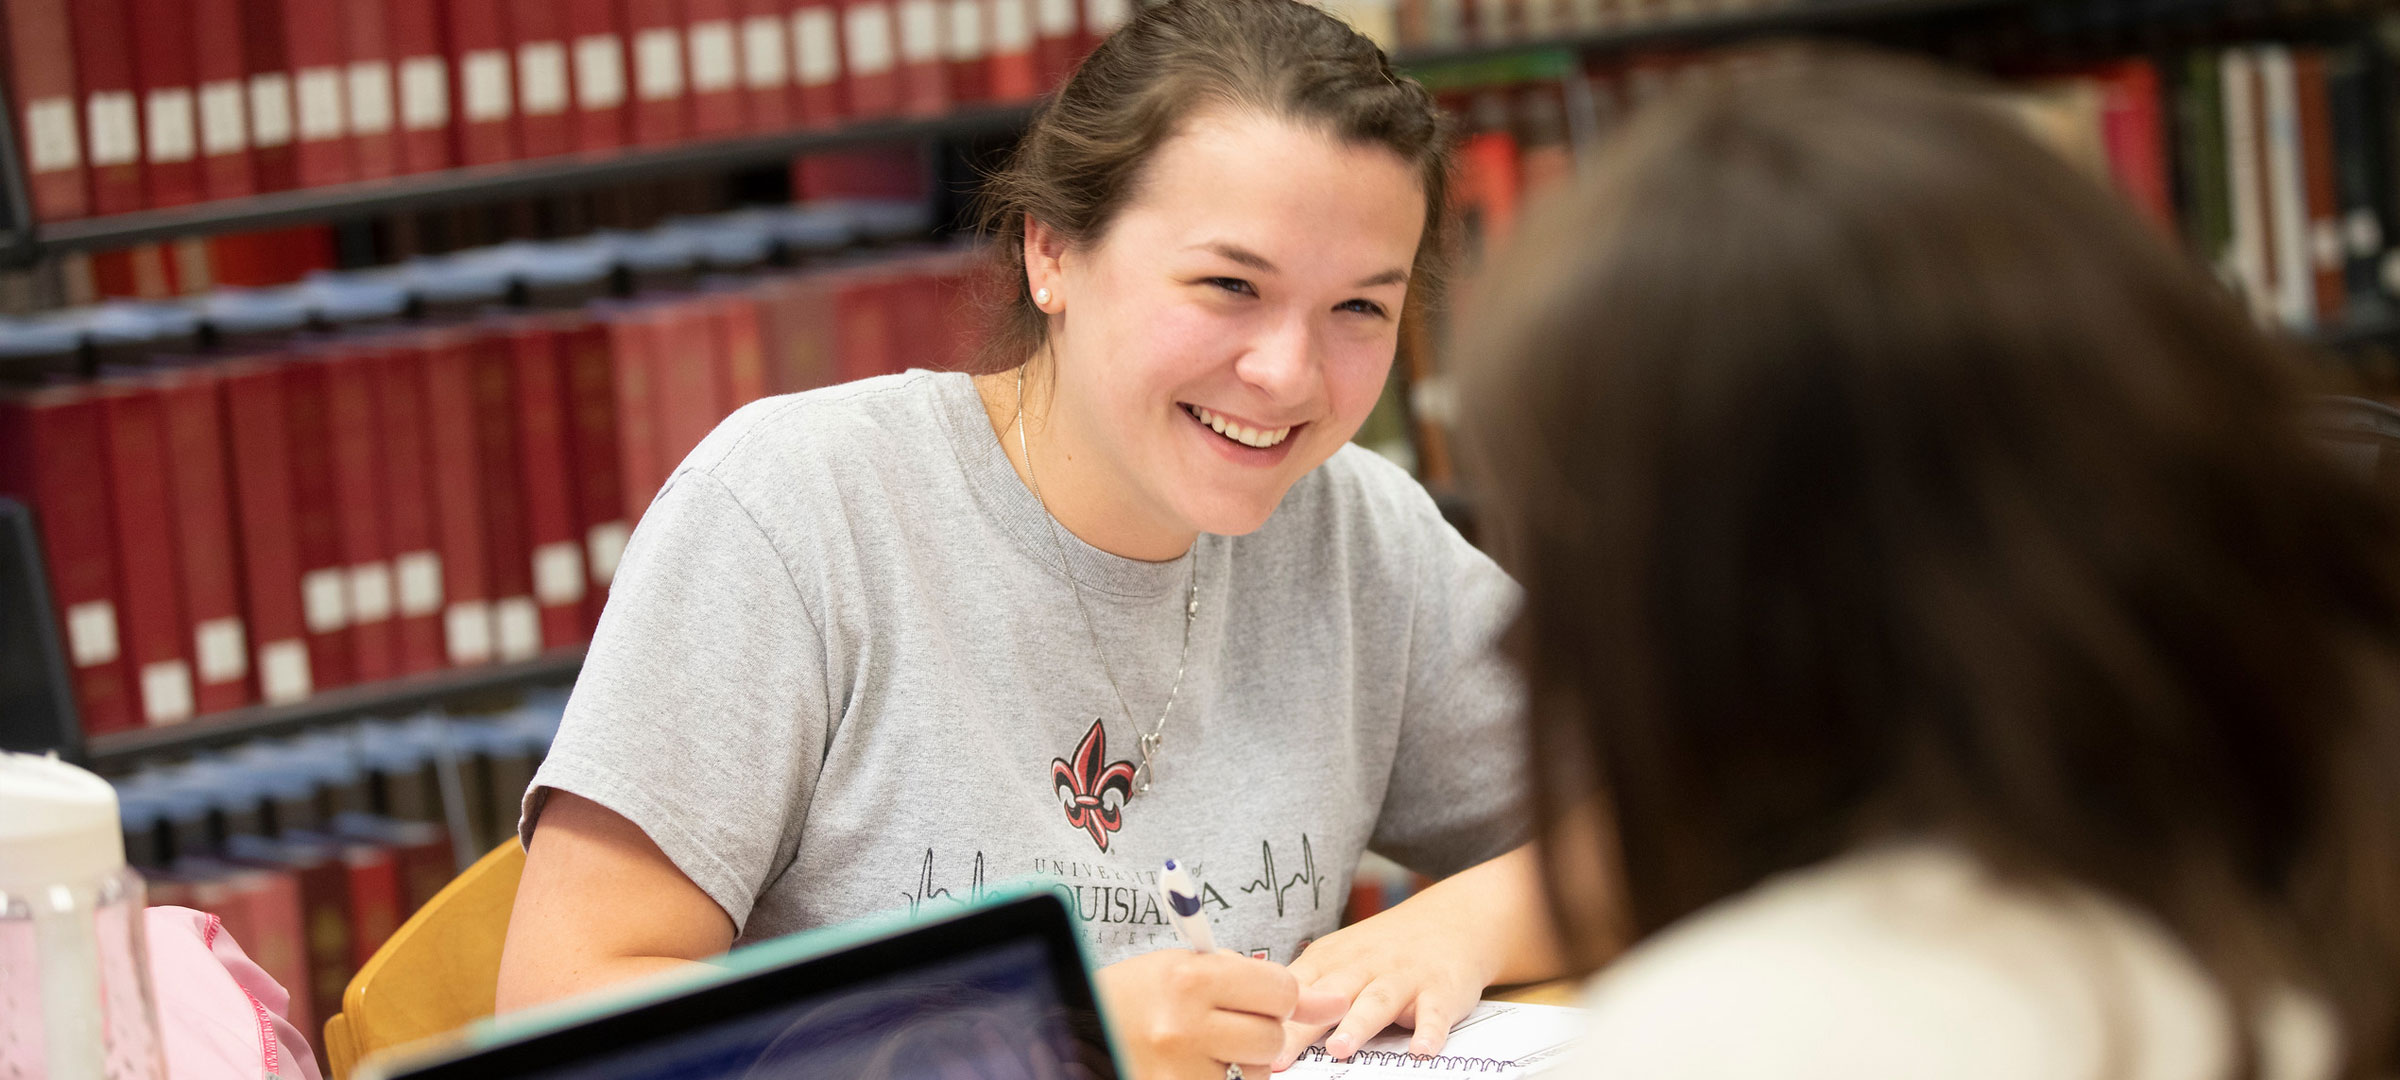 A University of Louisiana at Lafayette student smiling and laughing with a classmate while studying